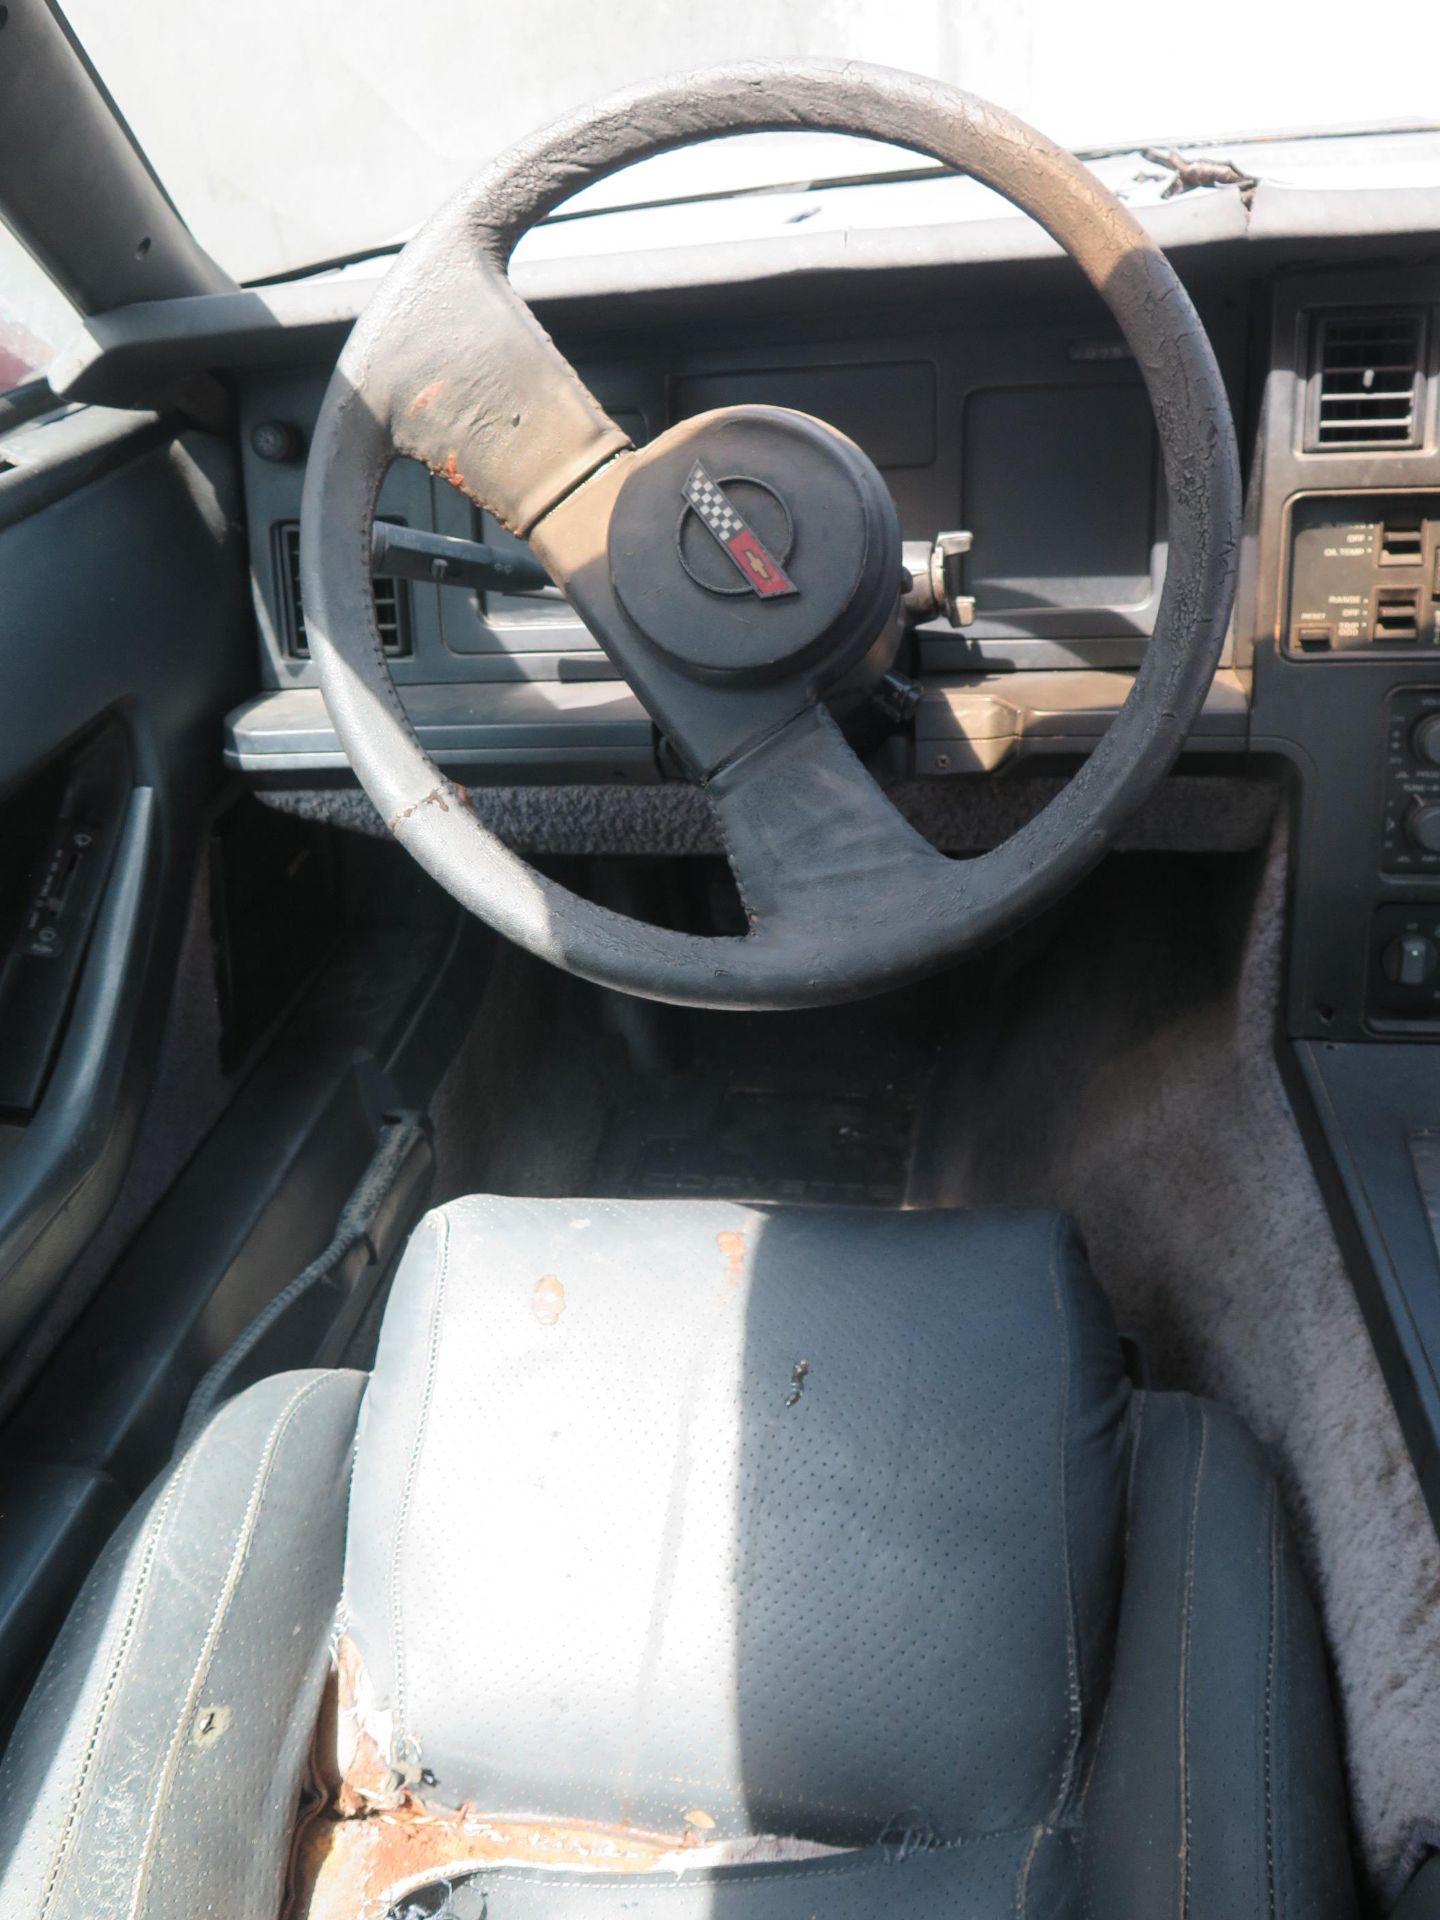 1984 CHEVROLET CORVETTE LISC# 2GBH936 W/ CROSSFIRE INJECTION GAS ENGINE, AUTOMATIC TRANS, VIN# - Image 5 of 9